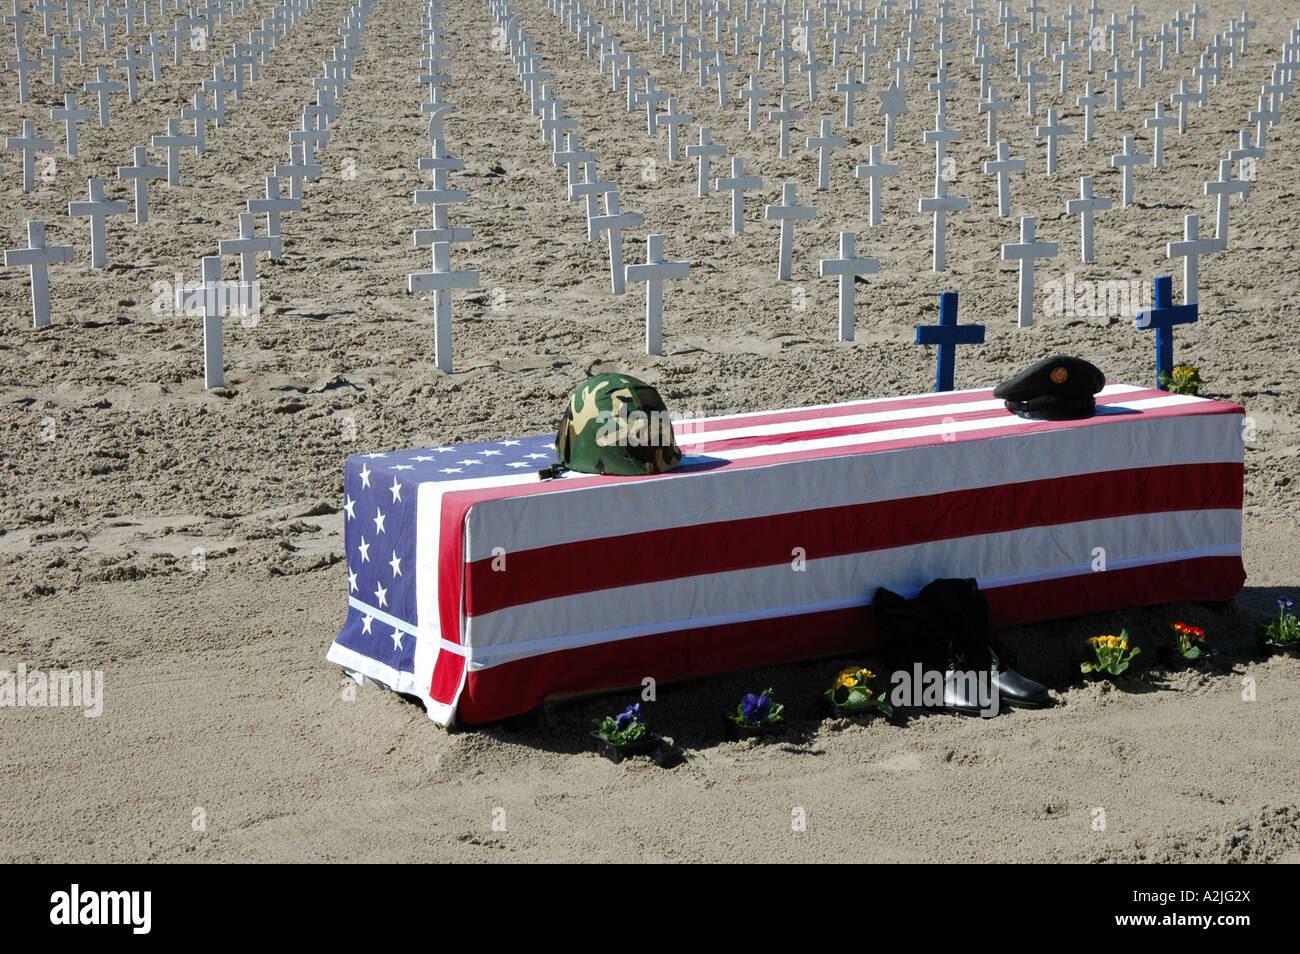 A military coffin draped in the stars and stripes flag in front of a sea of white crosses on Santa Monica beach, Los Angeles, CA Stock Photo